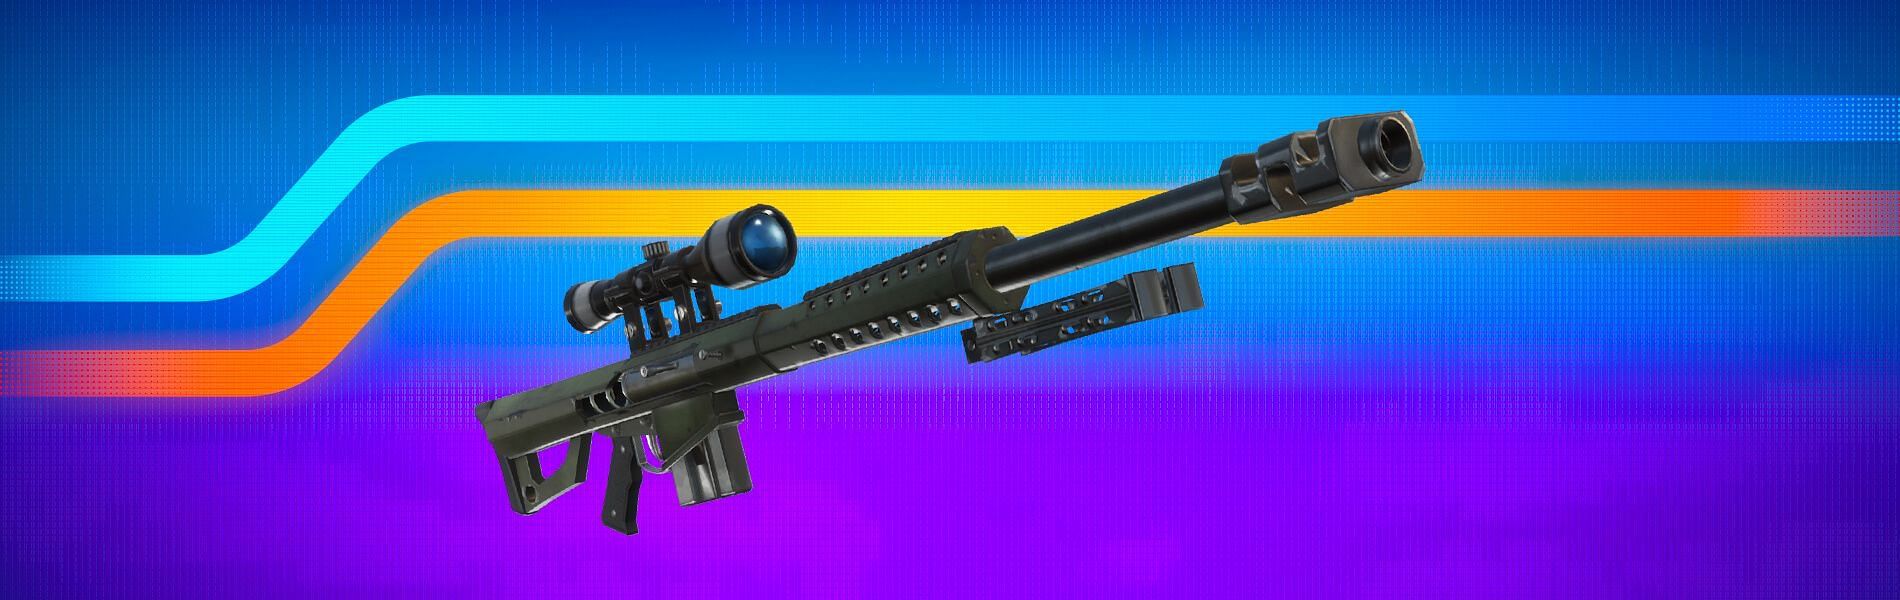 The heavy-hitting experience makes this sniper rifle one of the best Fortnite weapons of all time (Image via Epic Games)